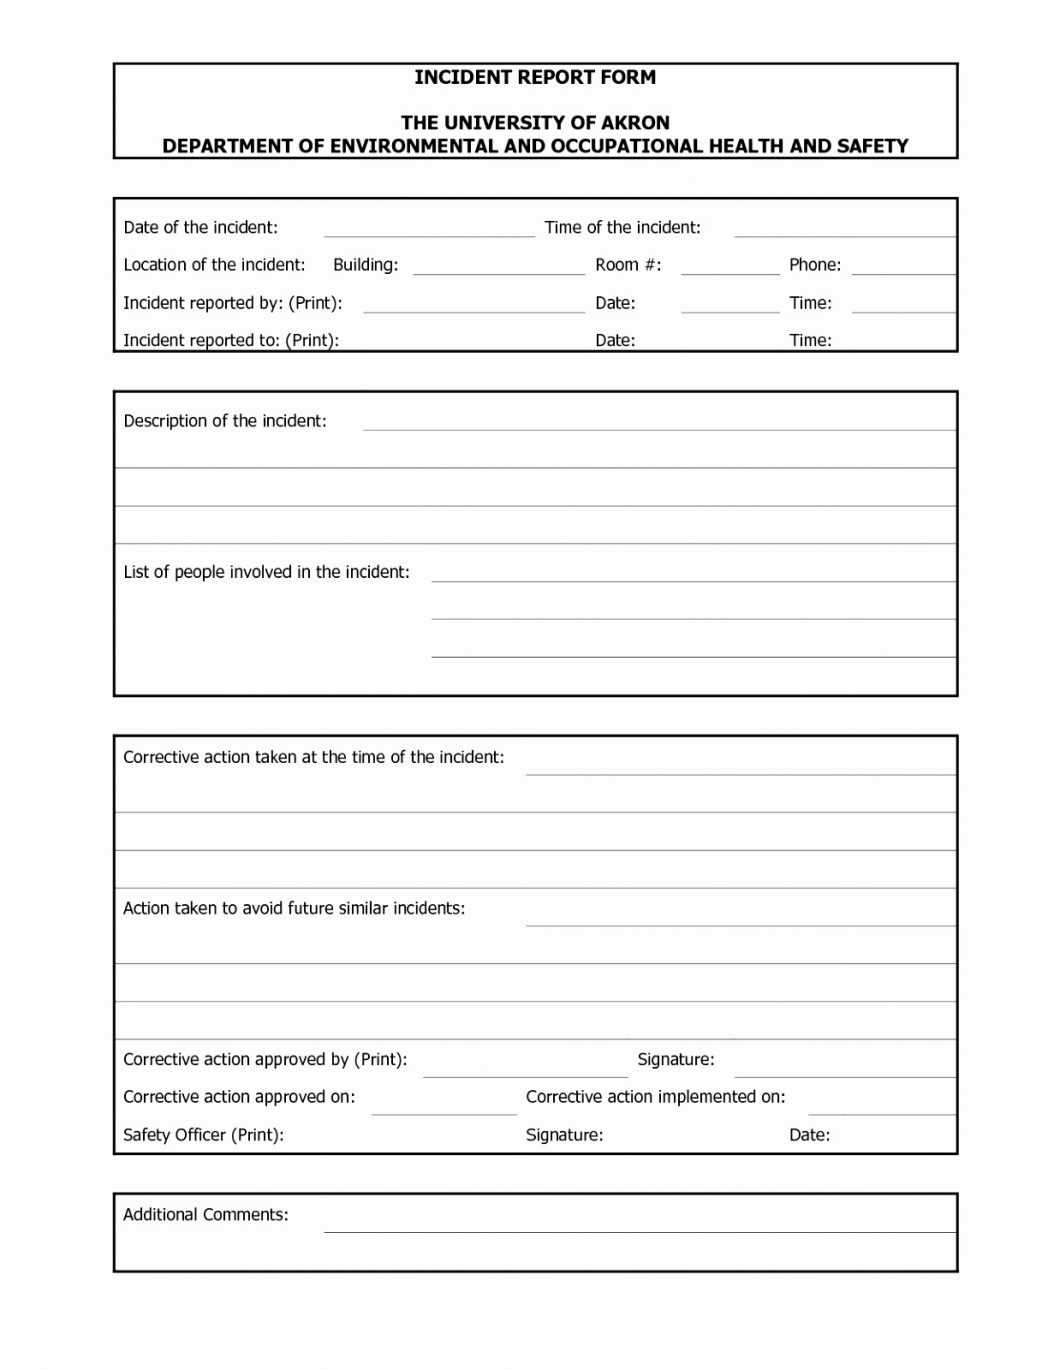 Automobile Accident Report Form Template Elegant Incident Inside Vehicle Accident Report Form Template